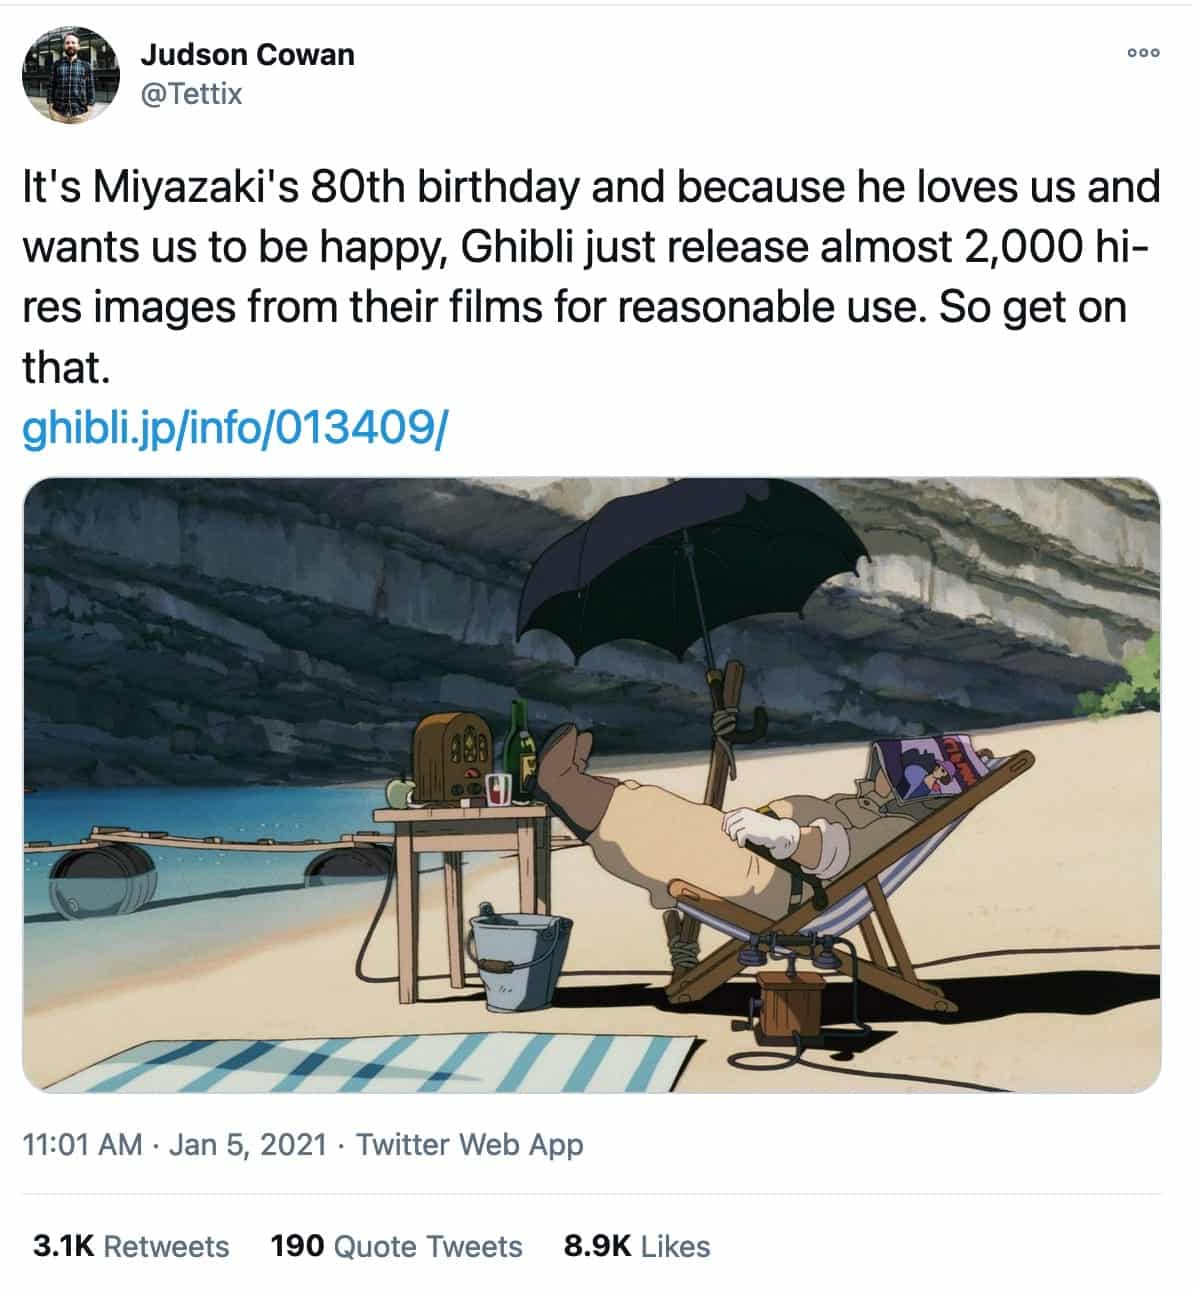 screenshot of tweet from @Tettix that reads  It's Miyazaki's 80th birthday and because he loves us and wants us to be happy, Ghibli just release almost 2,000 hi-res images from their films for reasonable use. So get on that. https://ghibli.jp/info/013409/